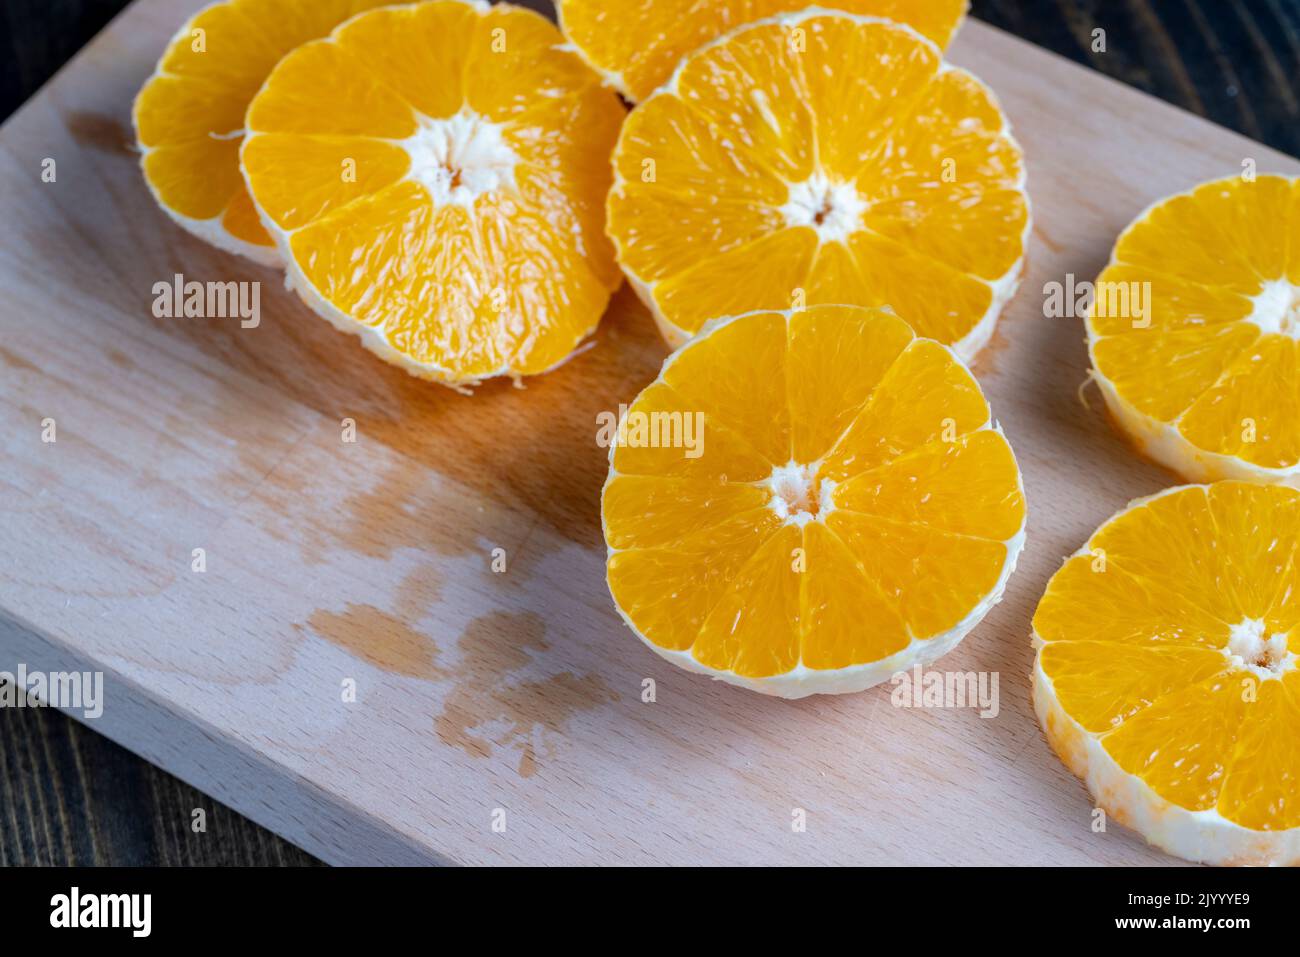 peeled ripe orange cut into slices during cooking, ripe orange divided into pieces with a knife Stock Photo